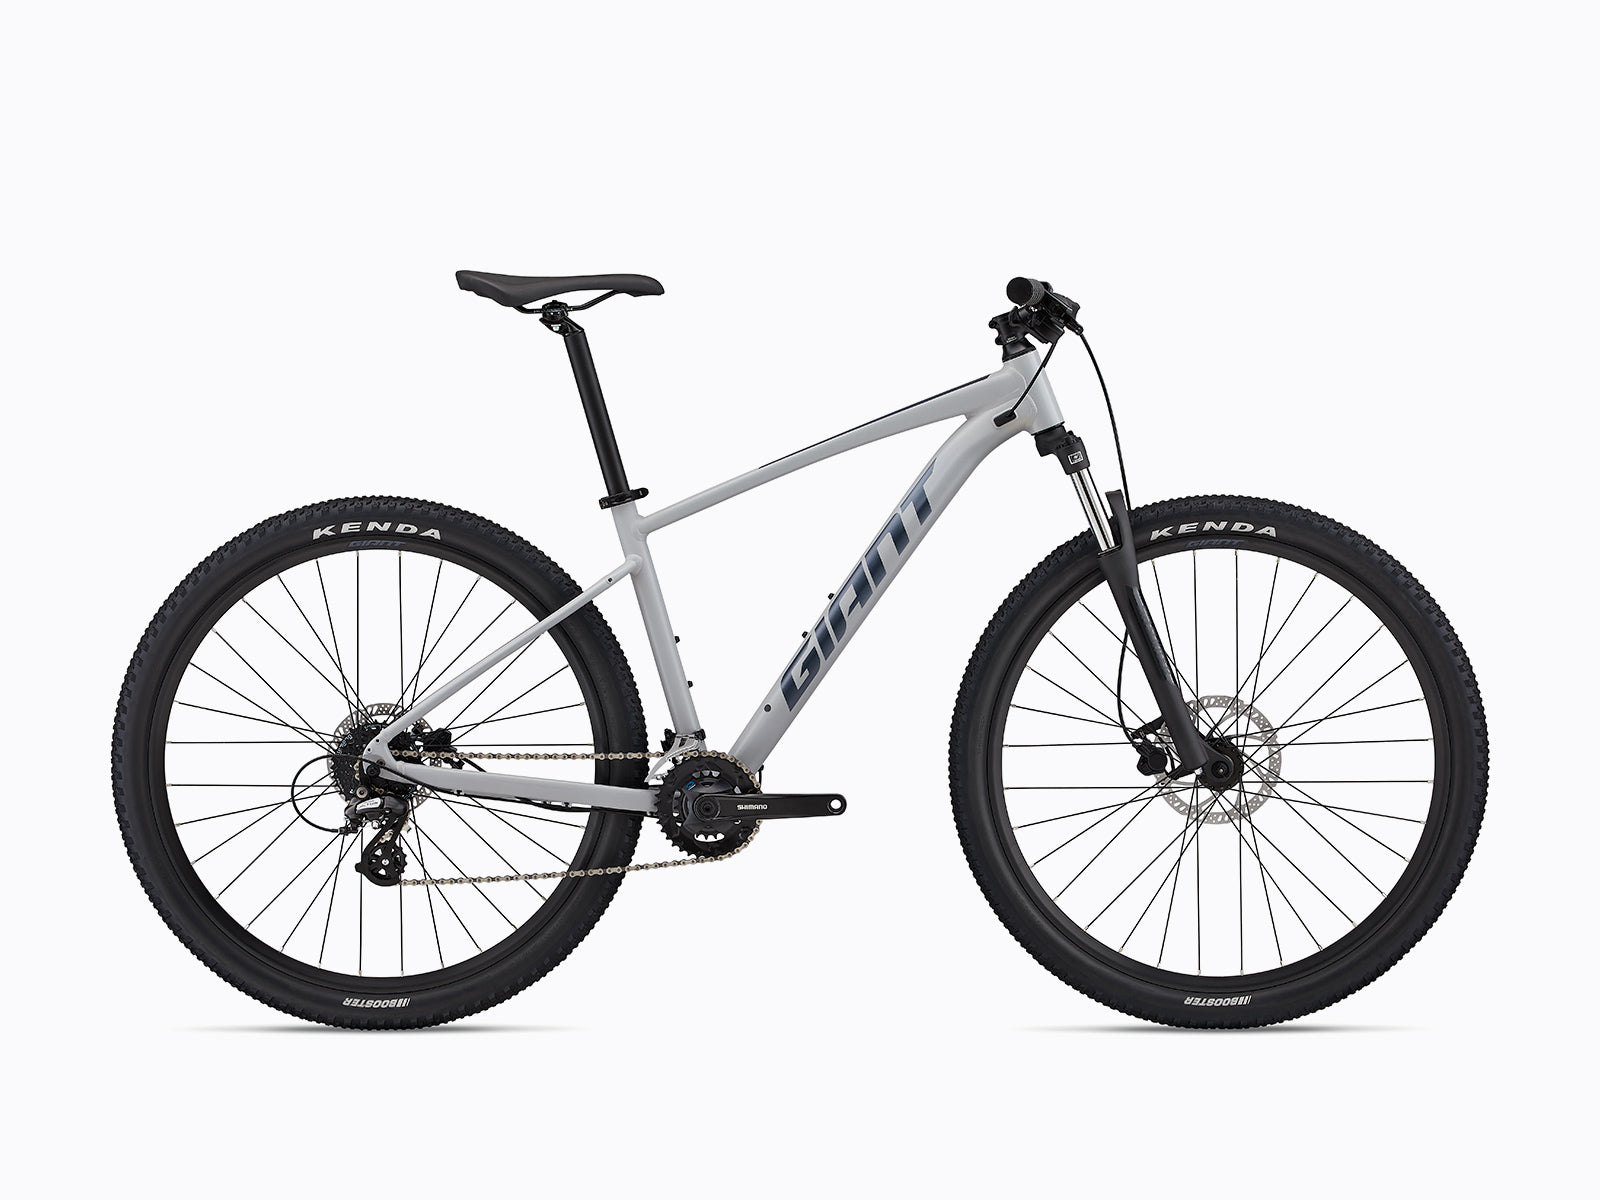 image features a Giant Talon 3, a modernized hardtail mountain bike that is designed for dirt trails